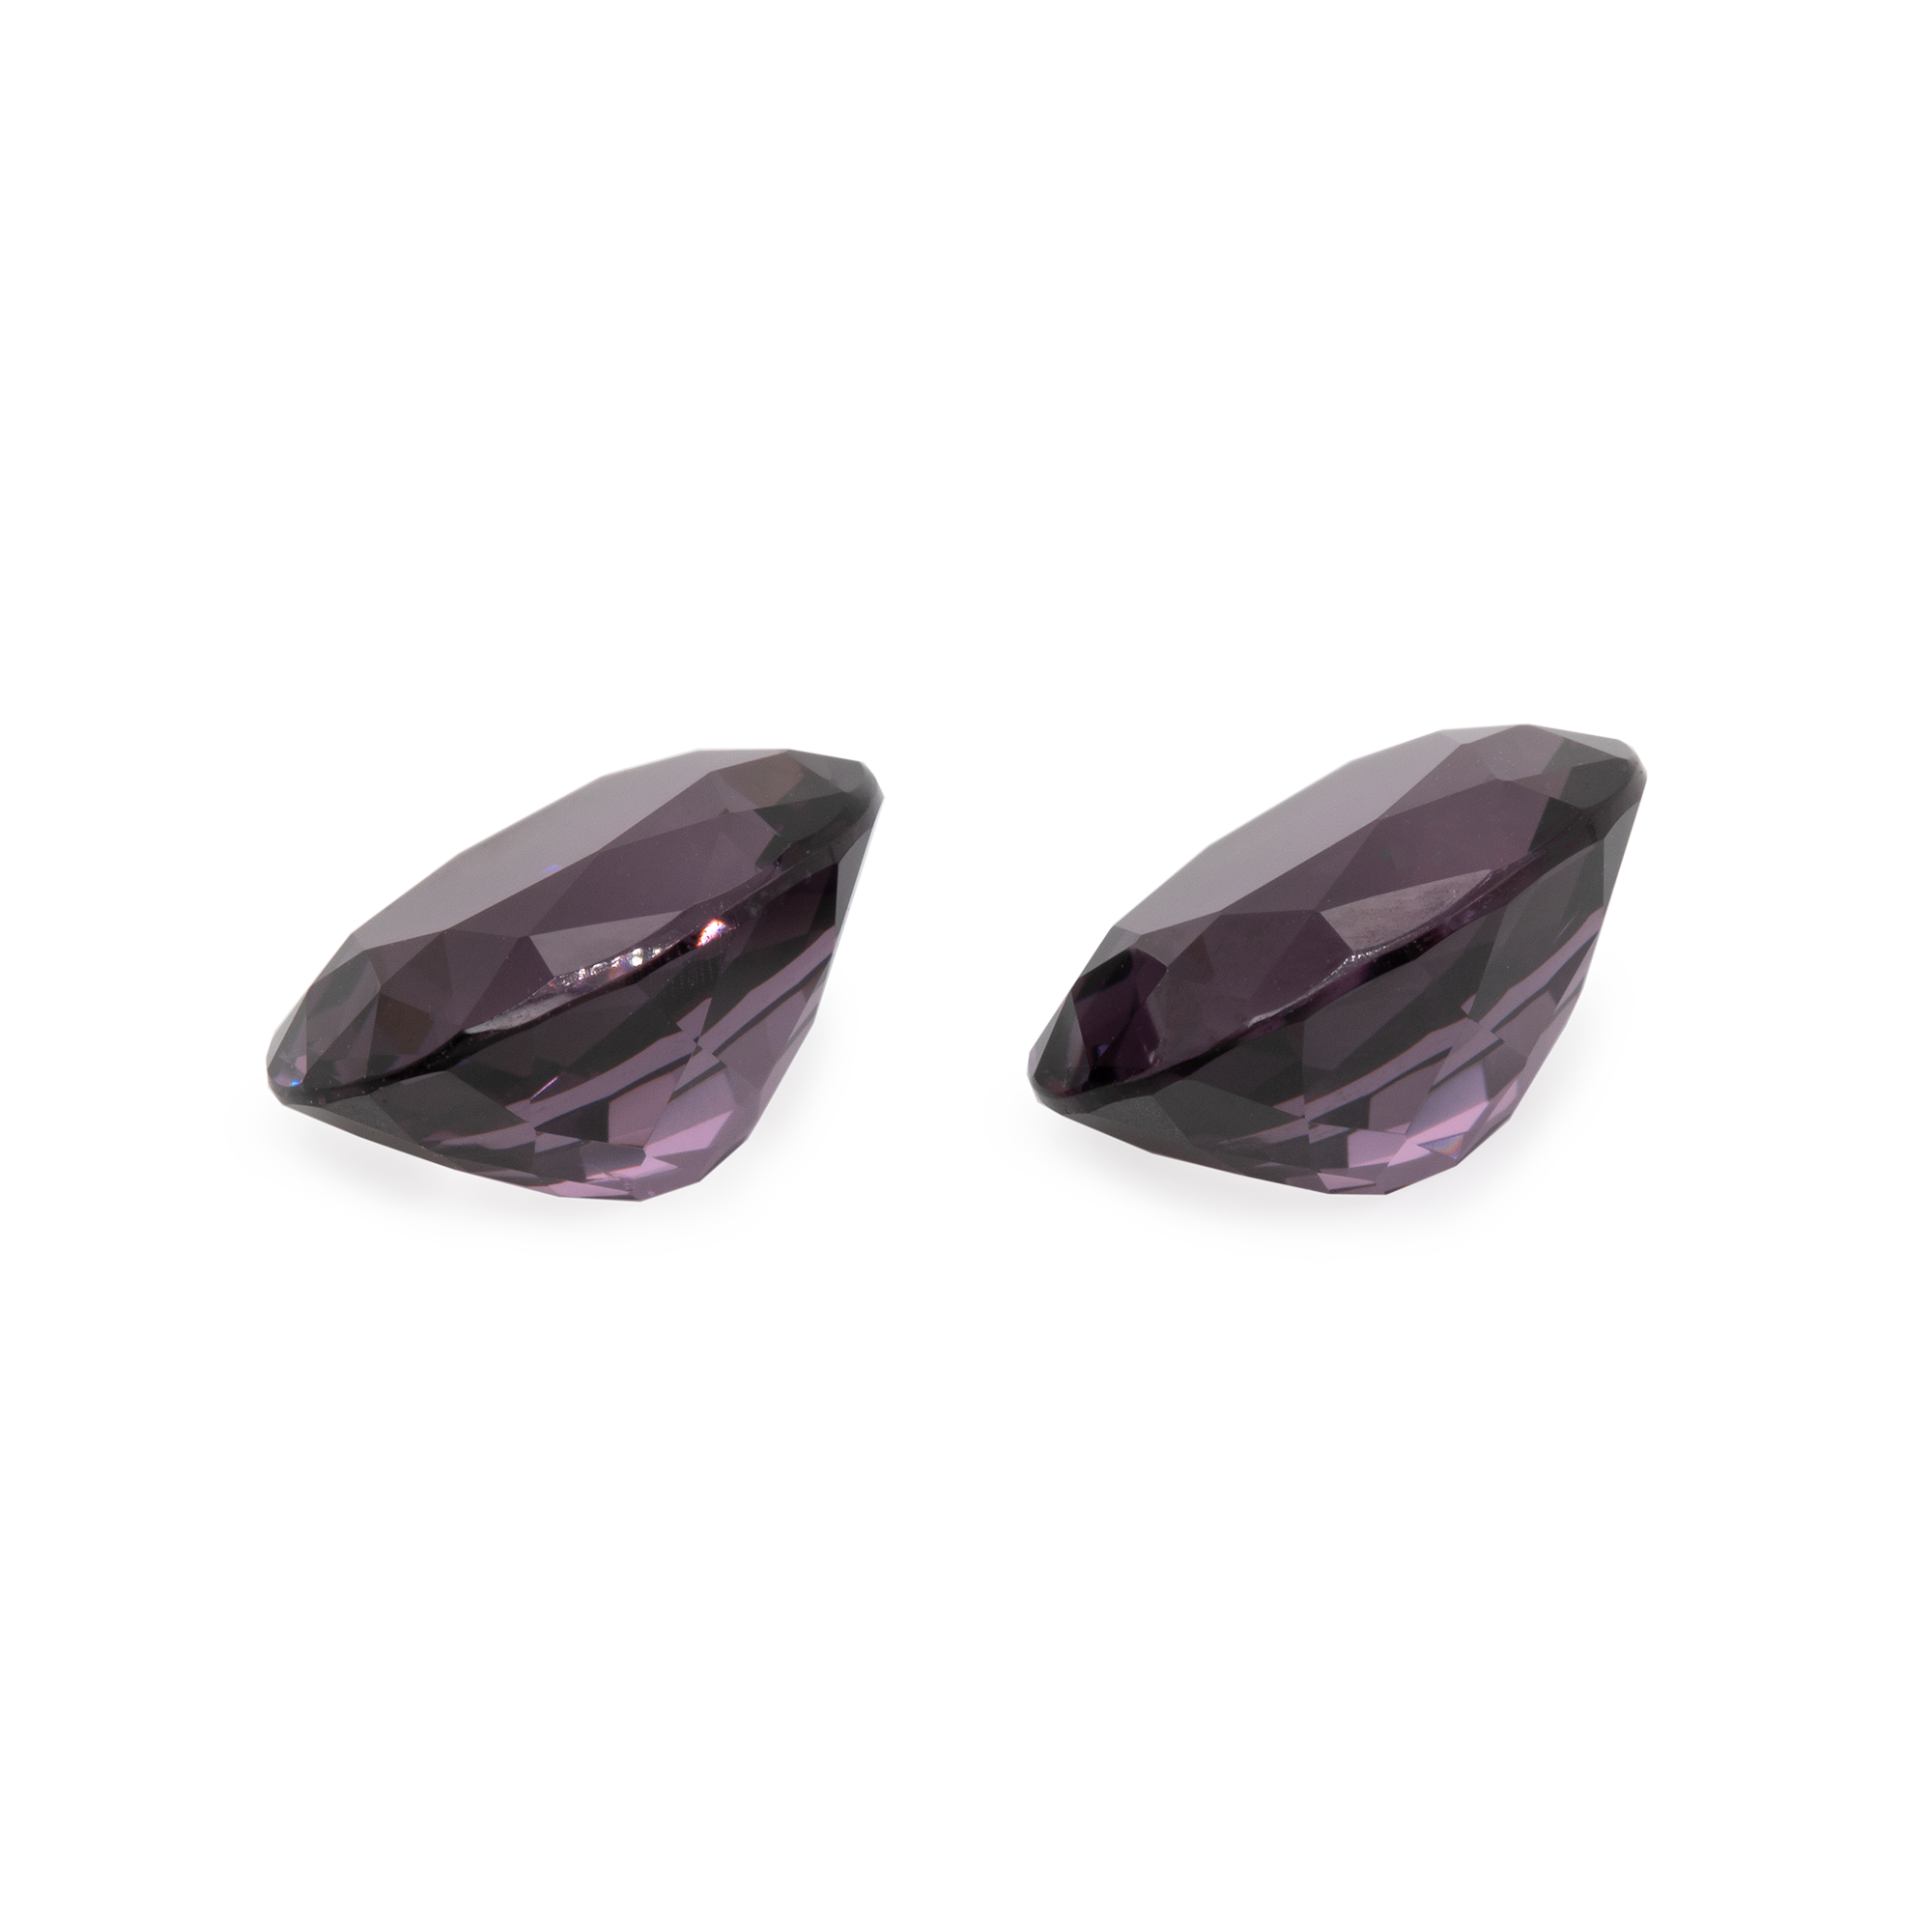 Spinel Pair - purple/grey, oval, 10x8 mm, 6.28 cts, No. SP30001